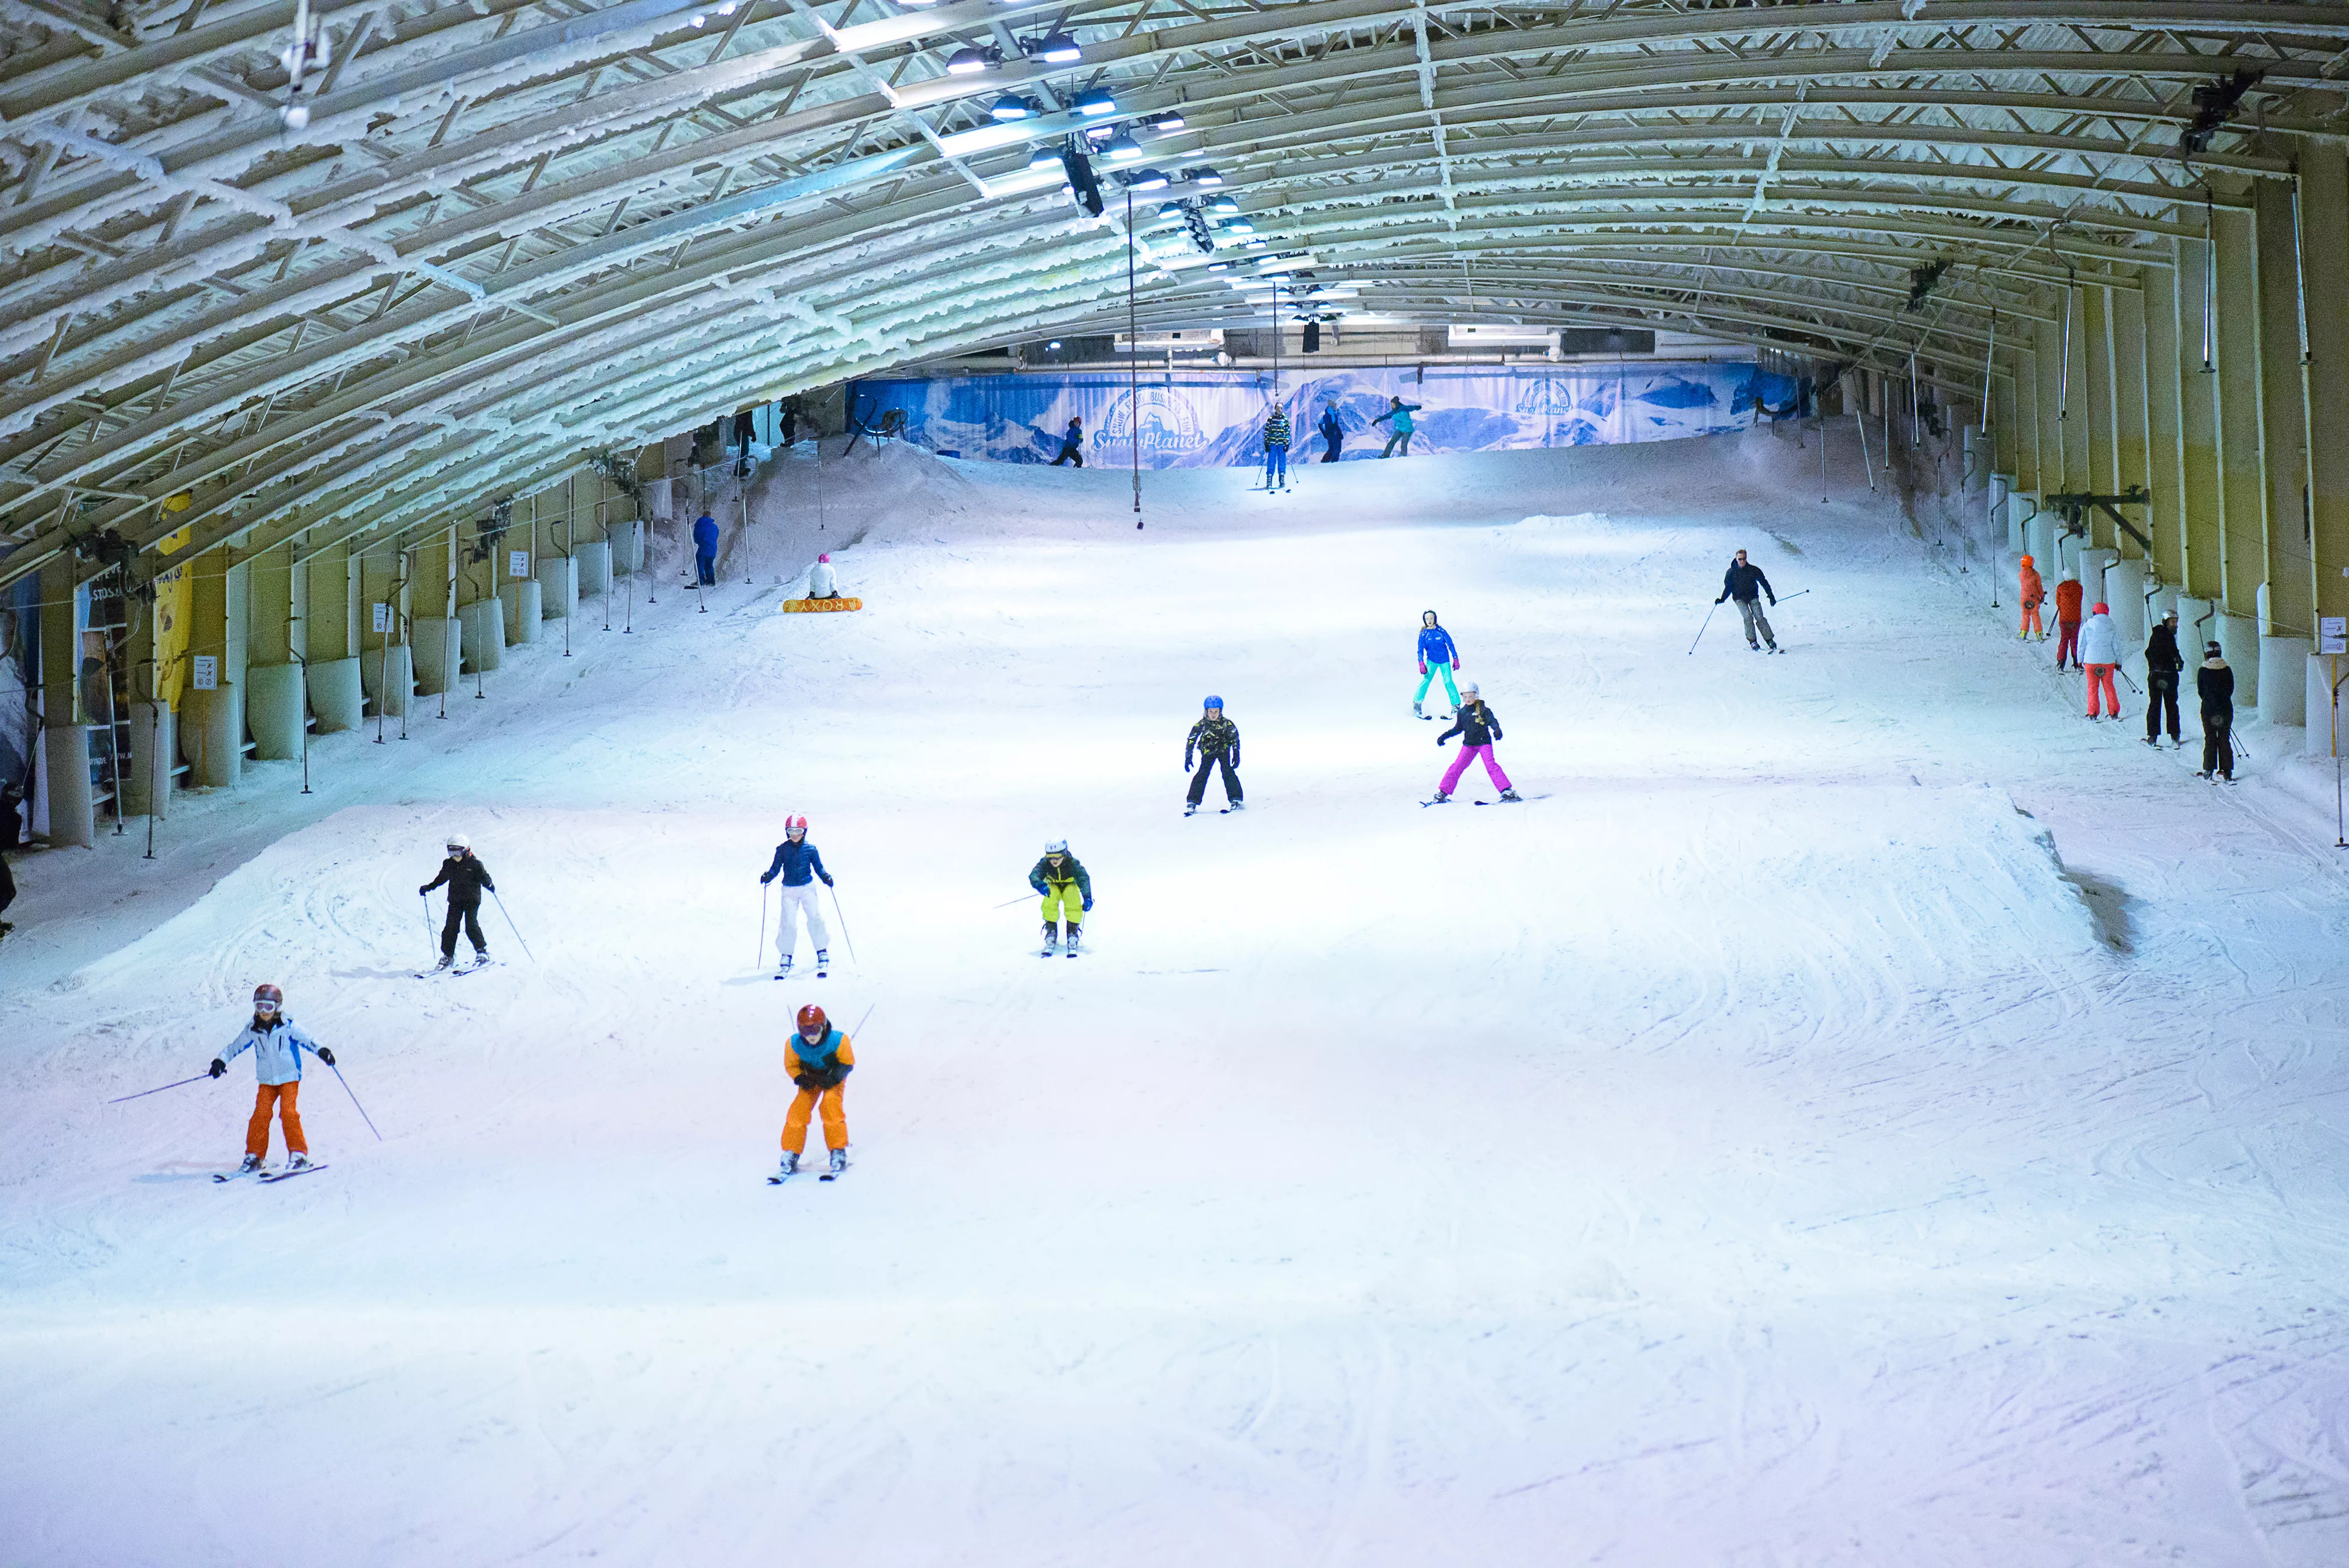 SnowWorld in Netherlands, Europe | Snowboarding,Skiing - Rated 4.9